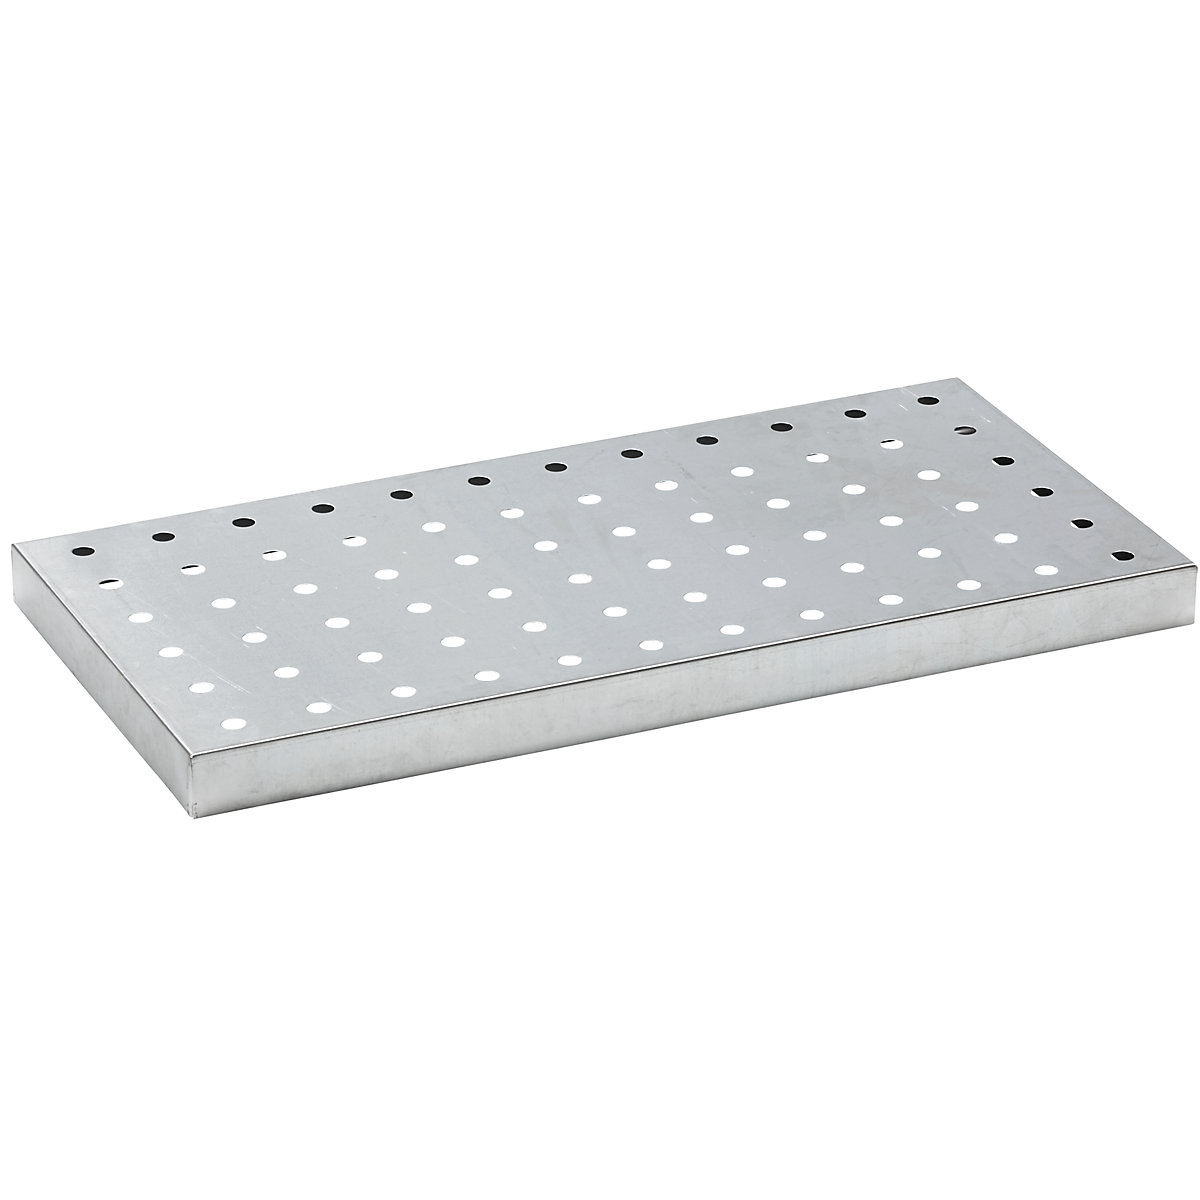 Perforated sheet metal grate – eurokraft basic, zinc plated, for universal tray, for 25 l sump capacity-1